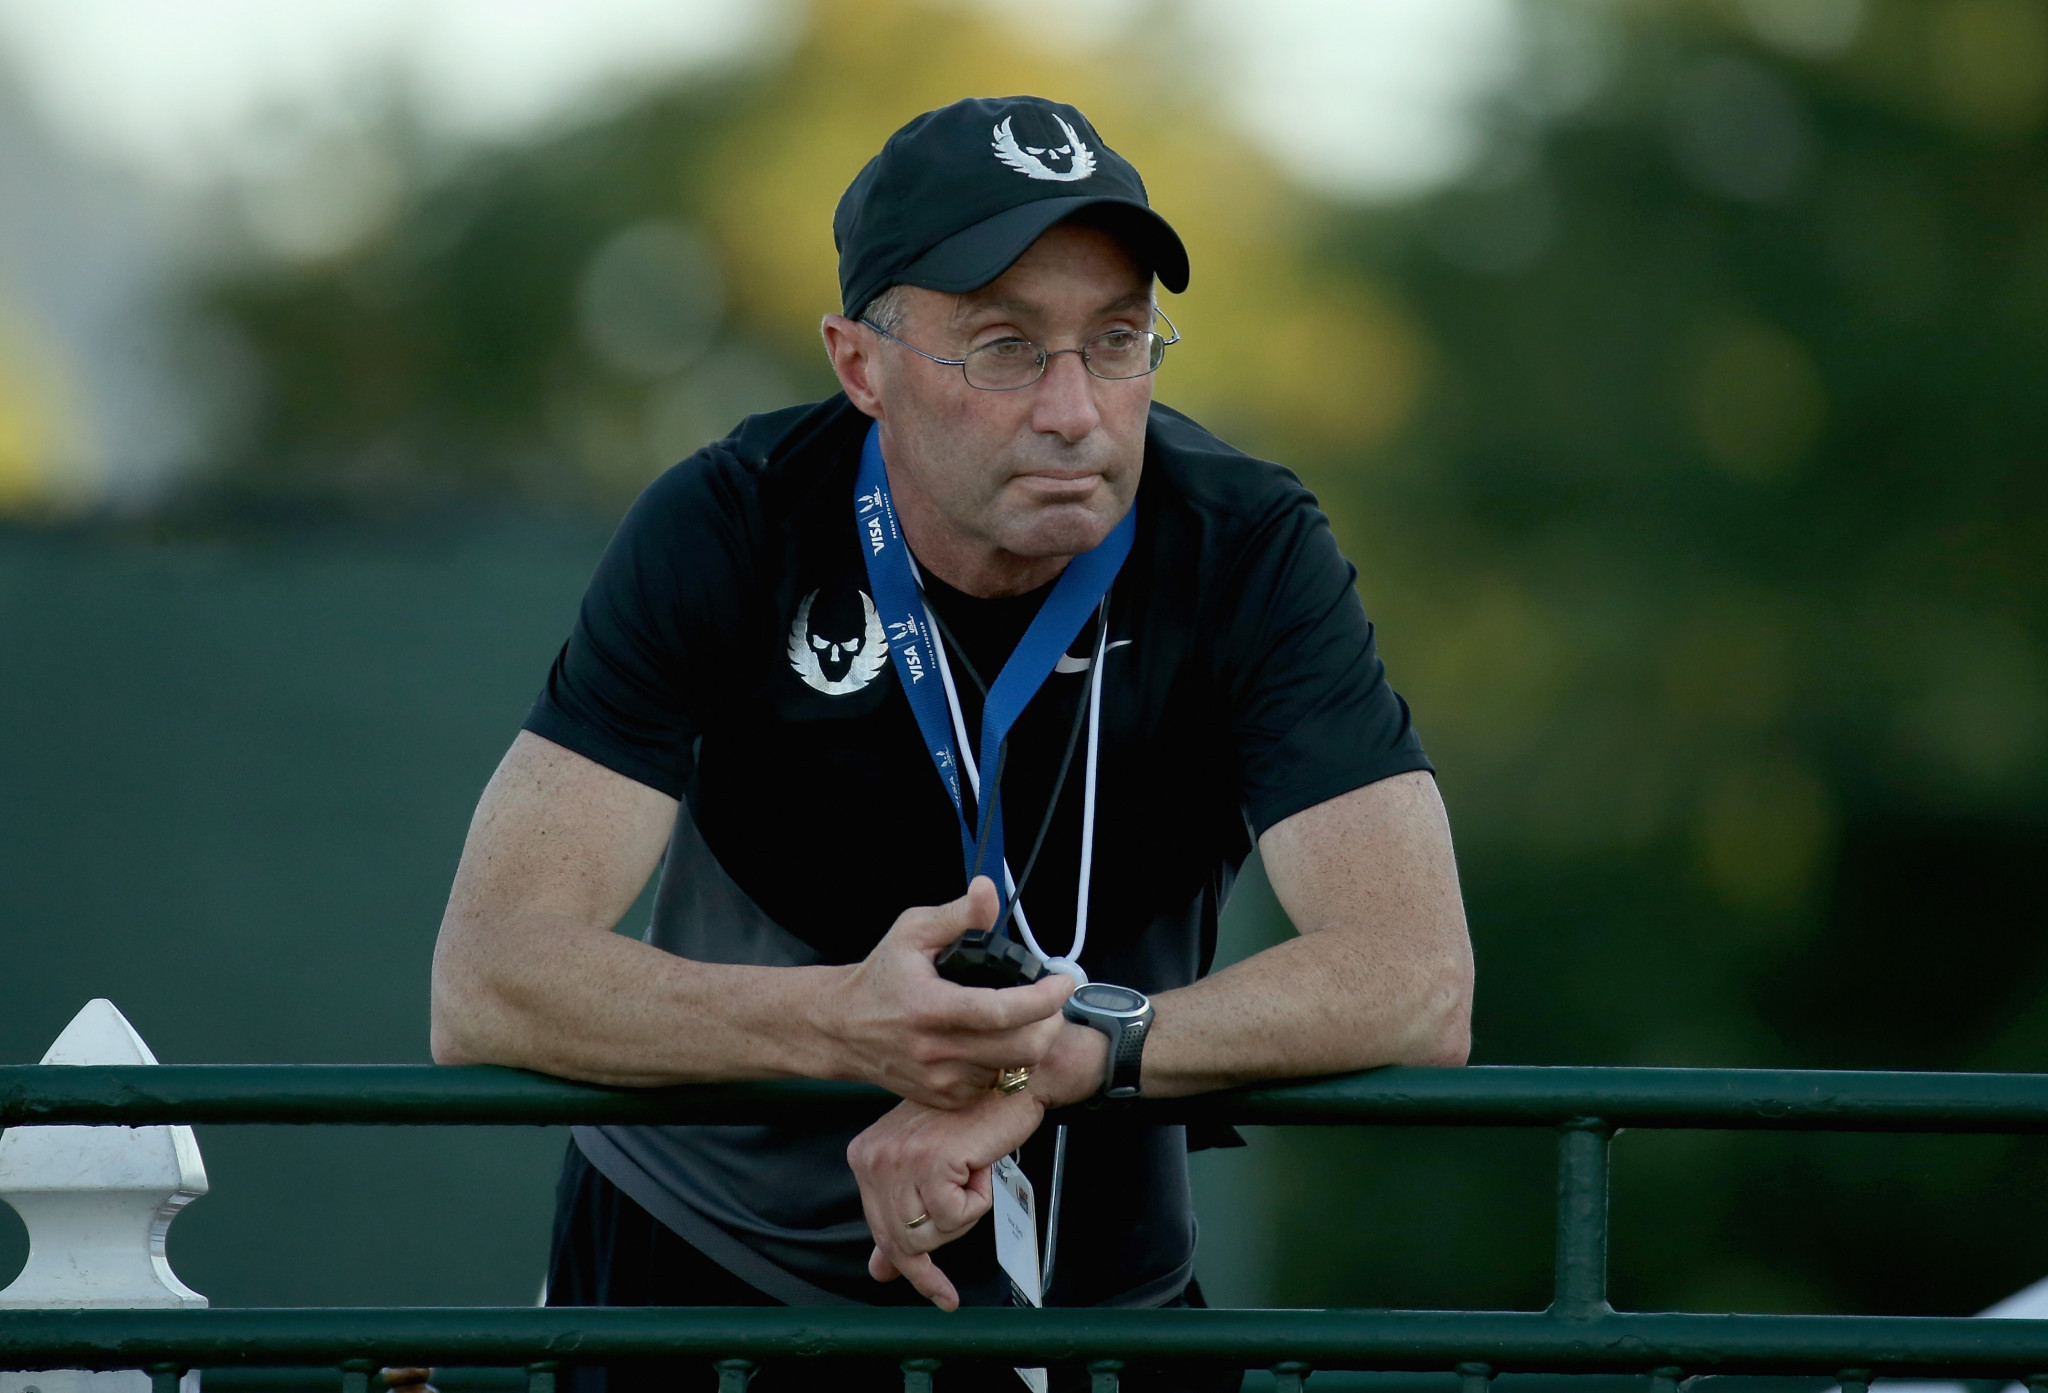 UK Anti-Doping's request came after an independent review on the relationship between UK Athletics and American coach Alberto Salazar was published ©Getty Images